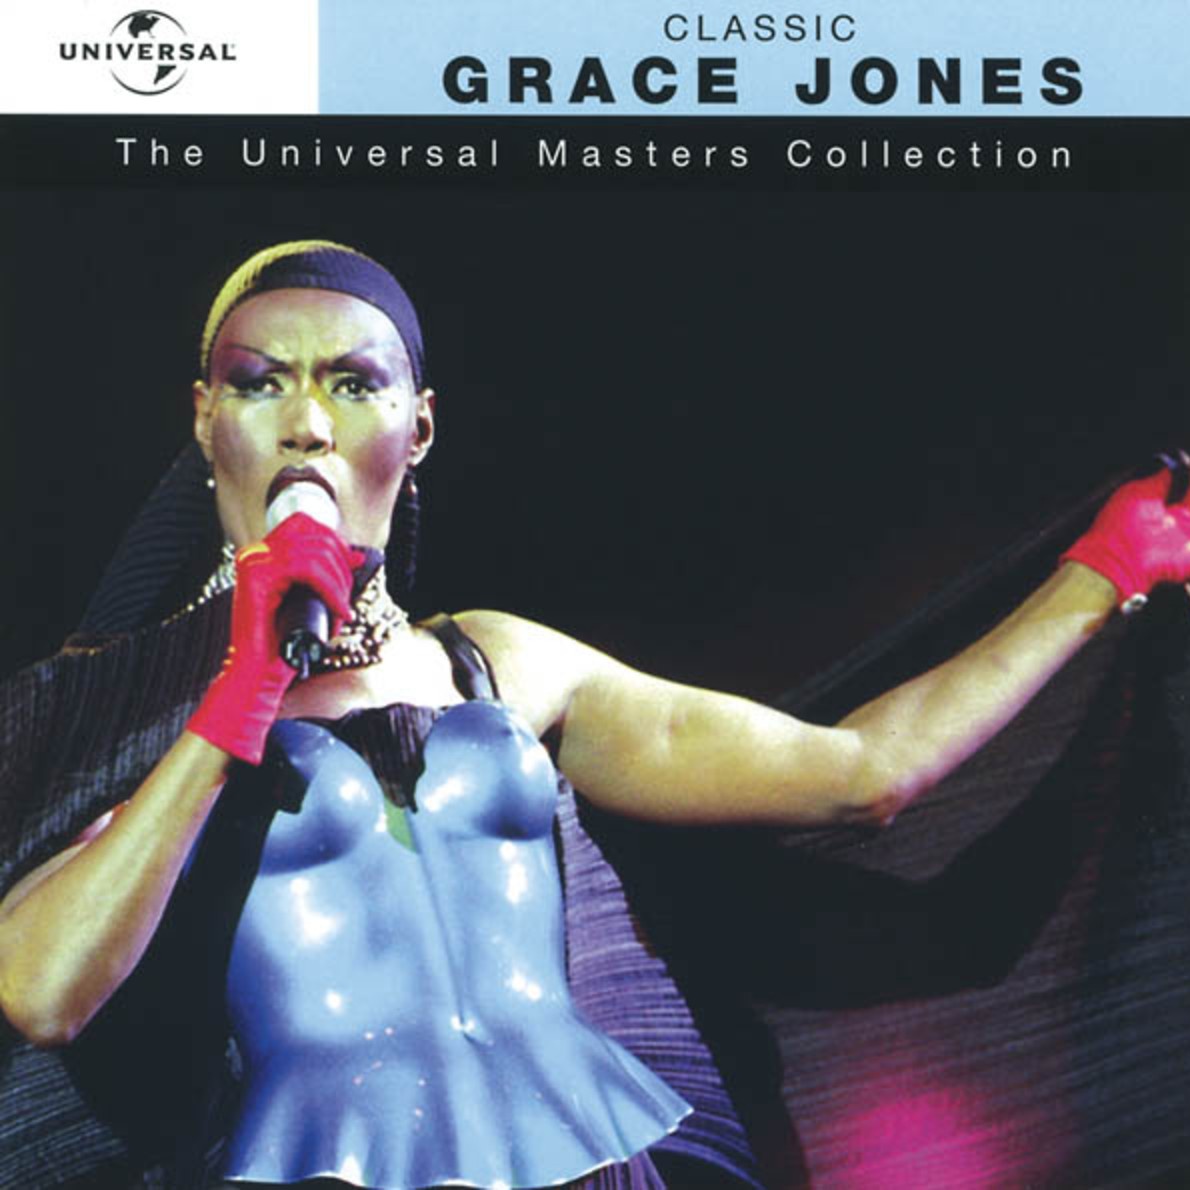 The Universal Masters Collection: Classic Grace Jones